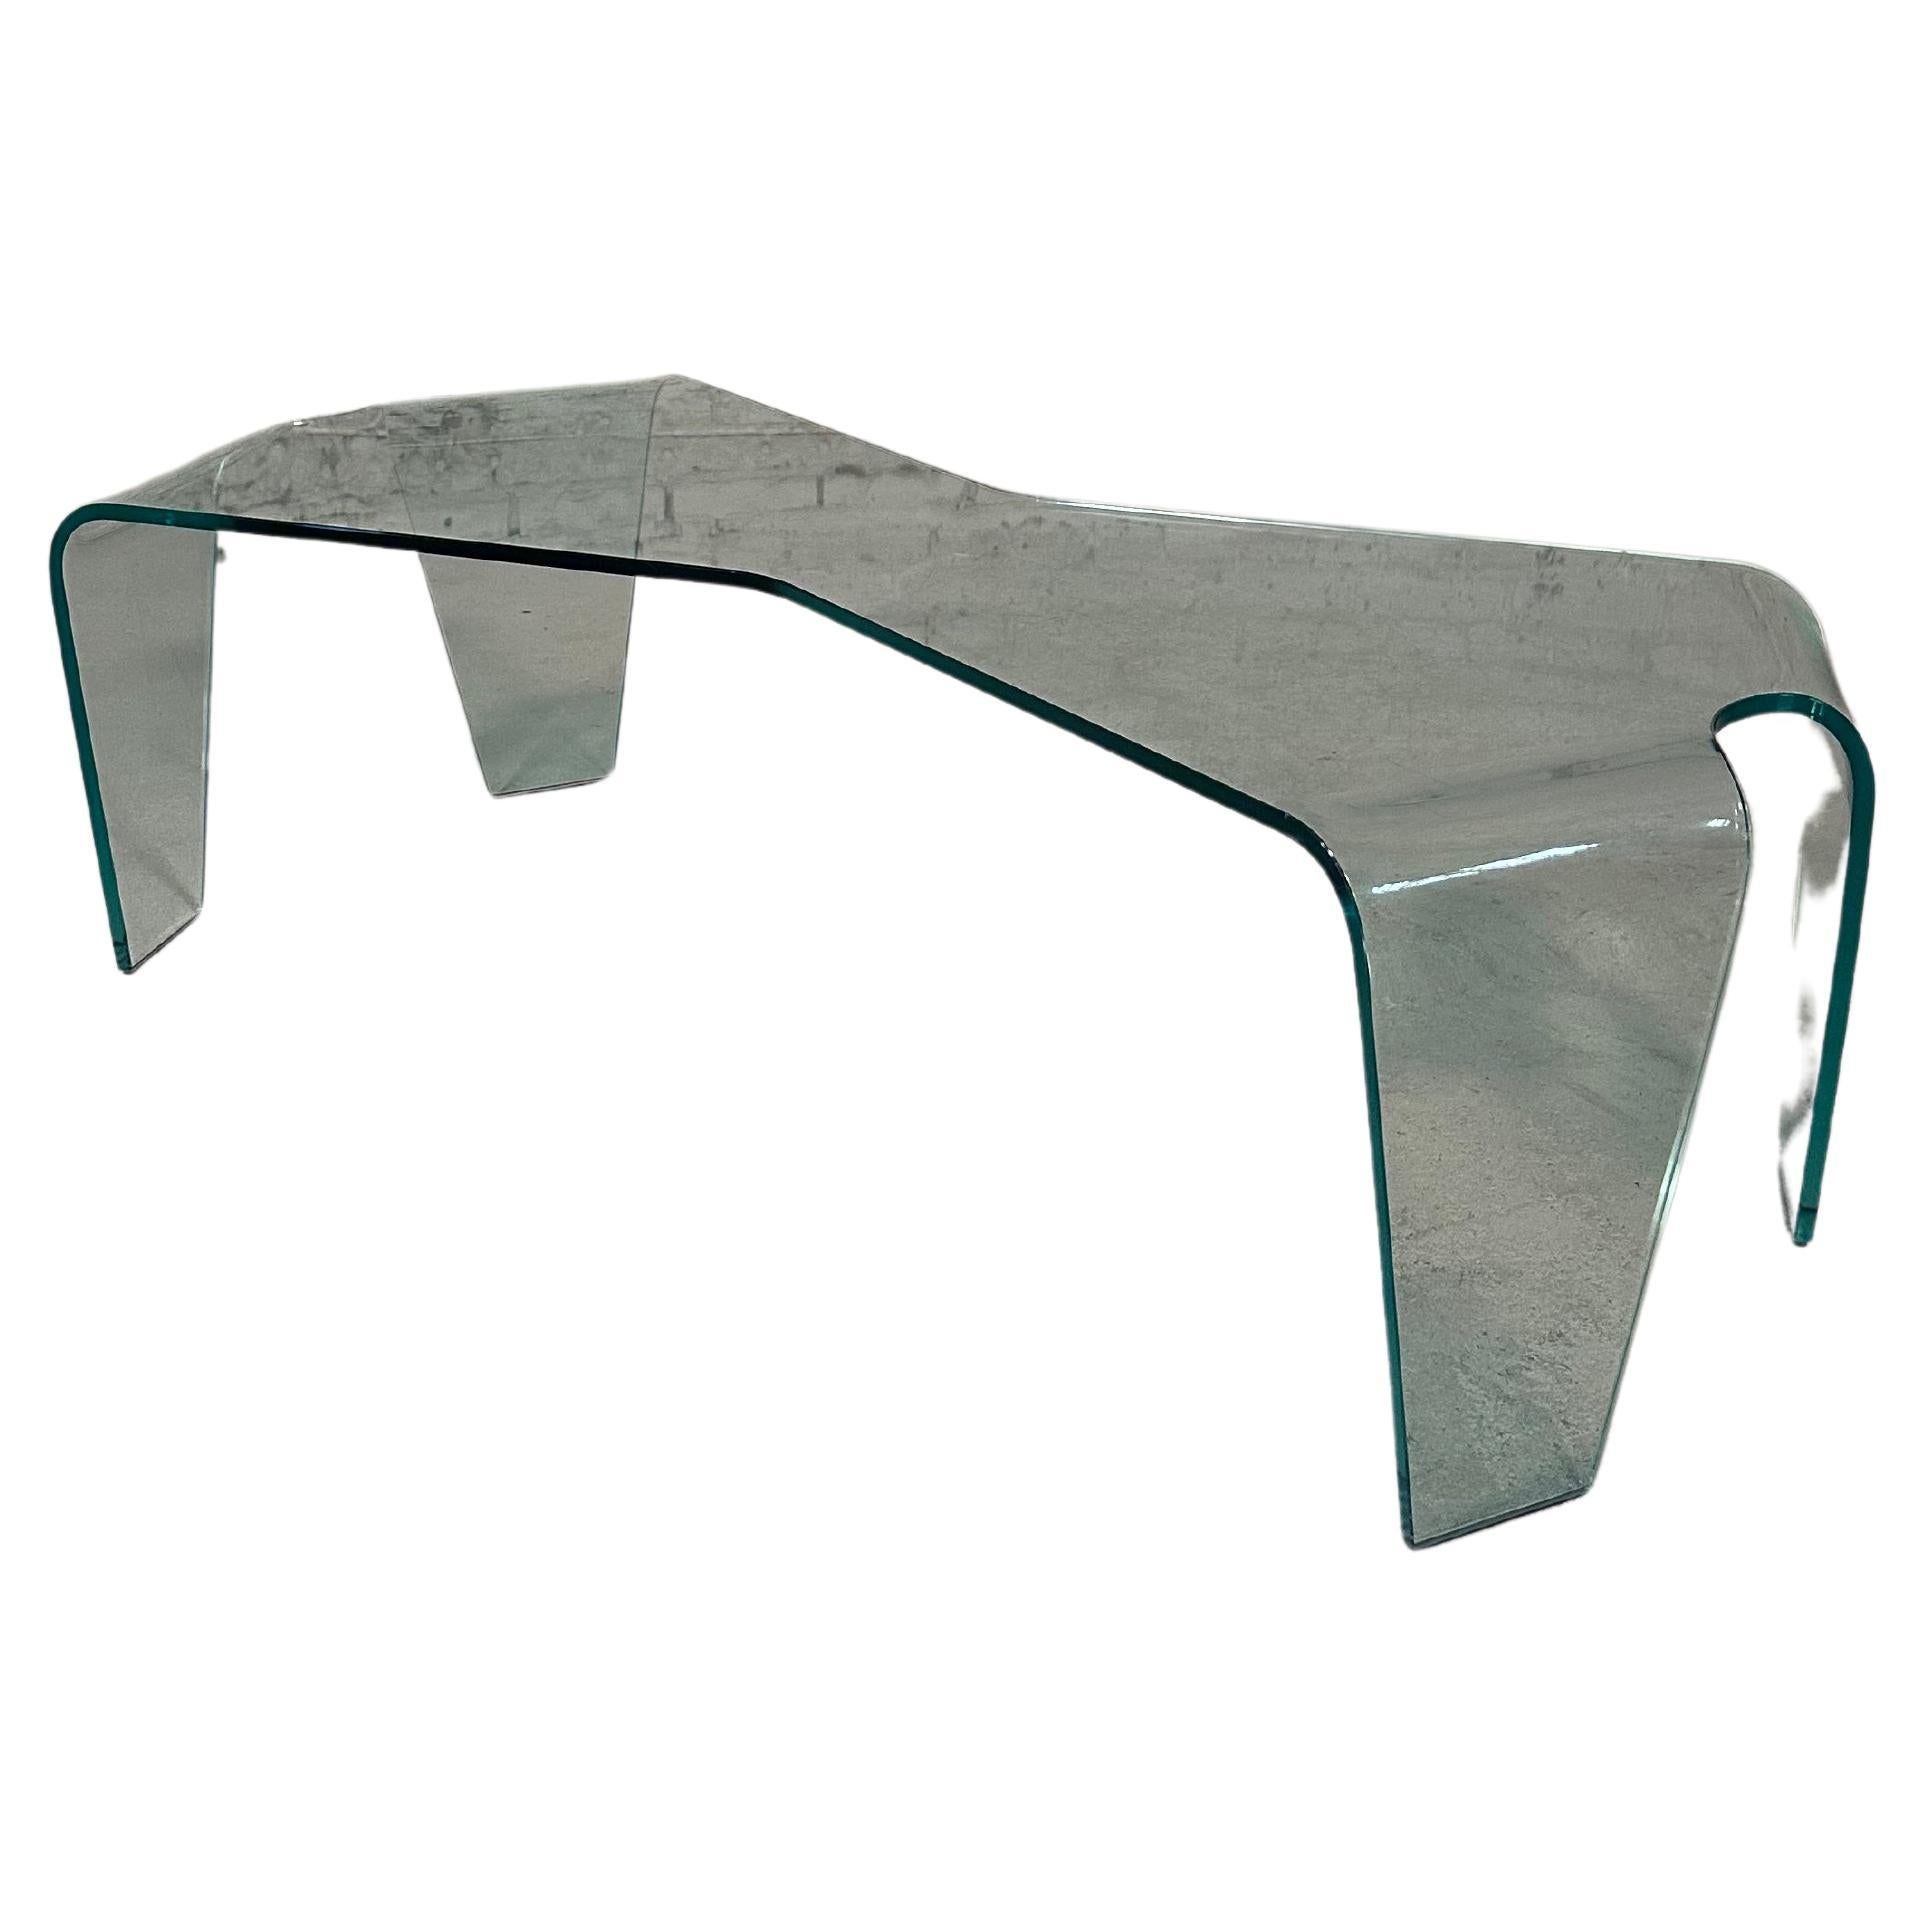 Curved Glass Coffee Table For Sale